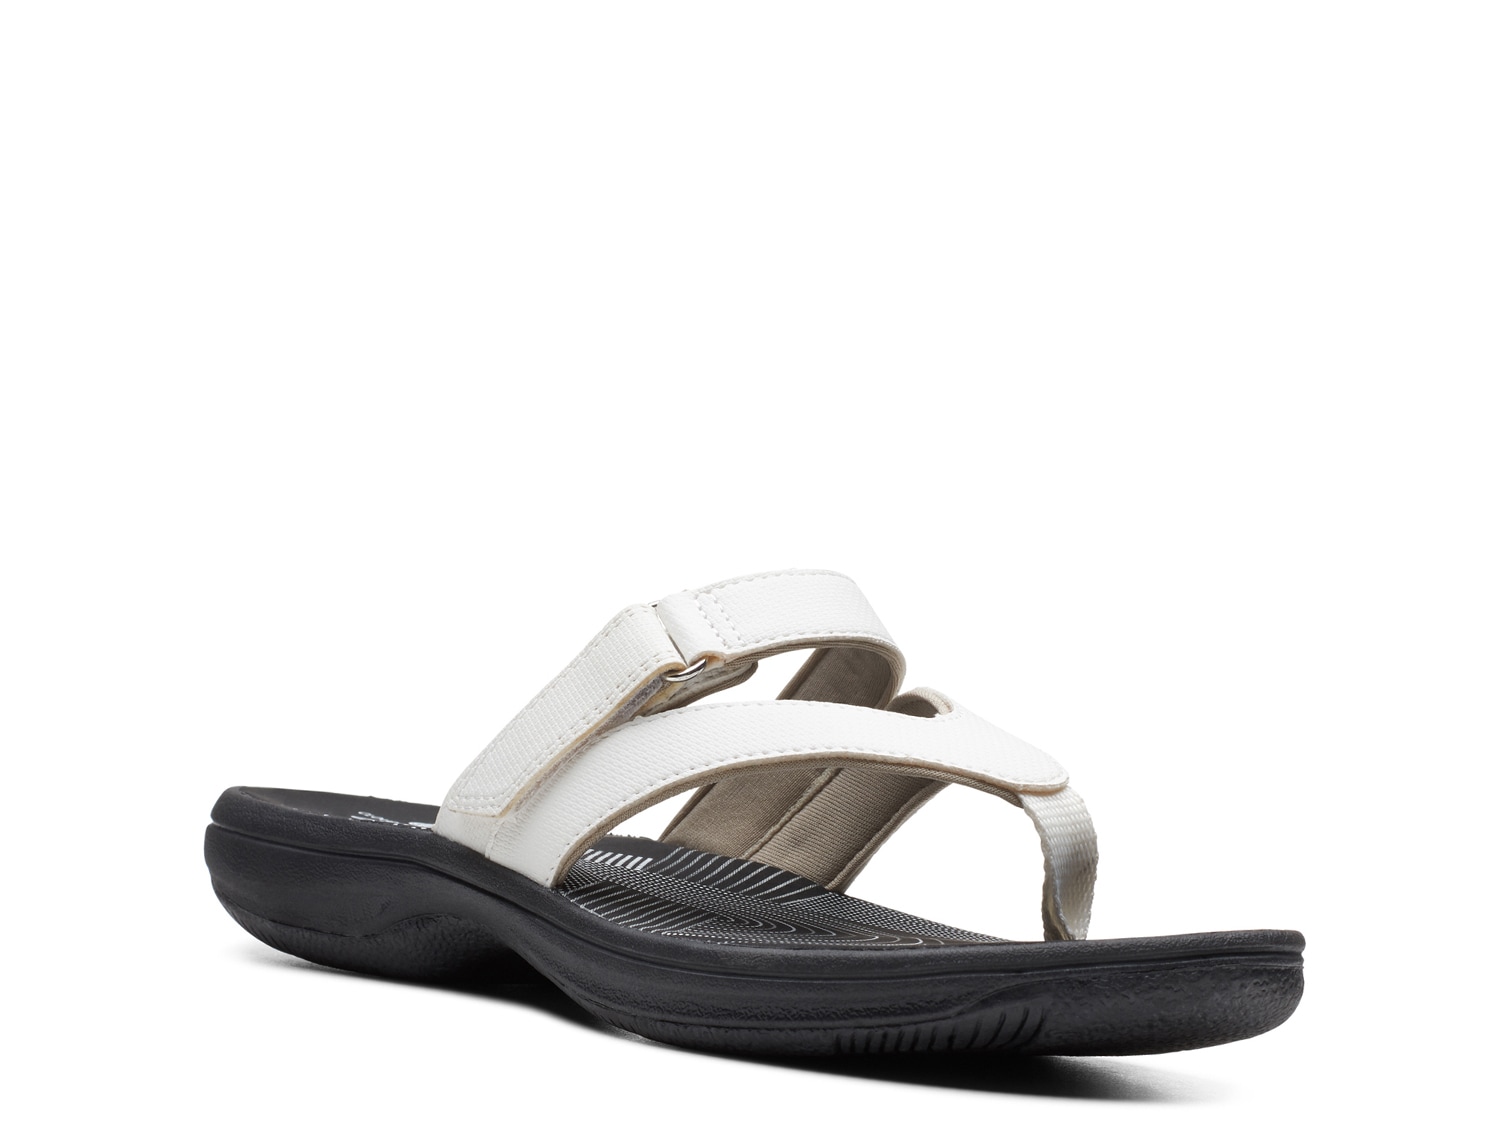 where to buy clarks sandals